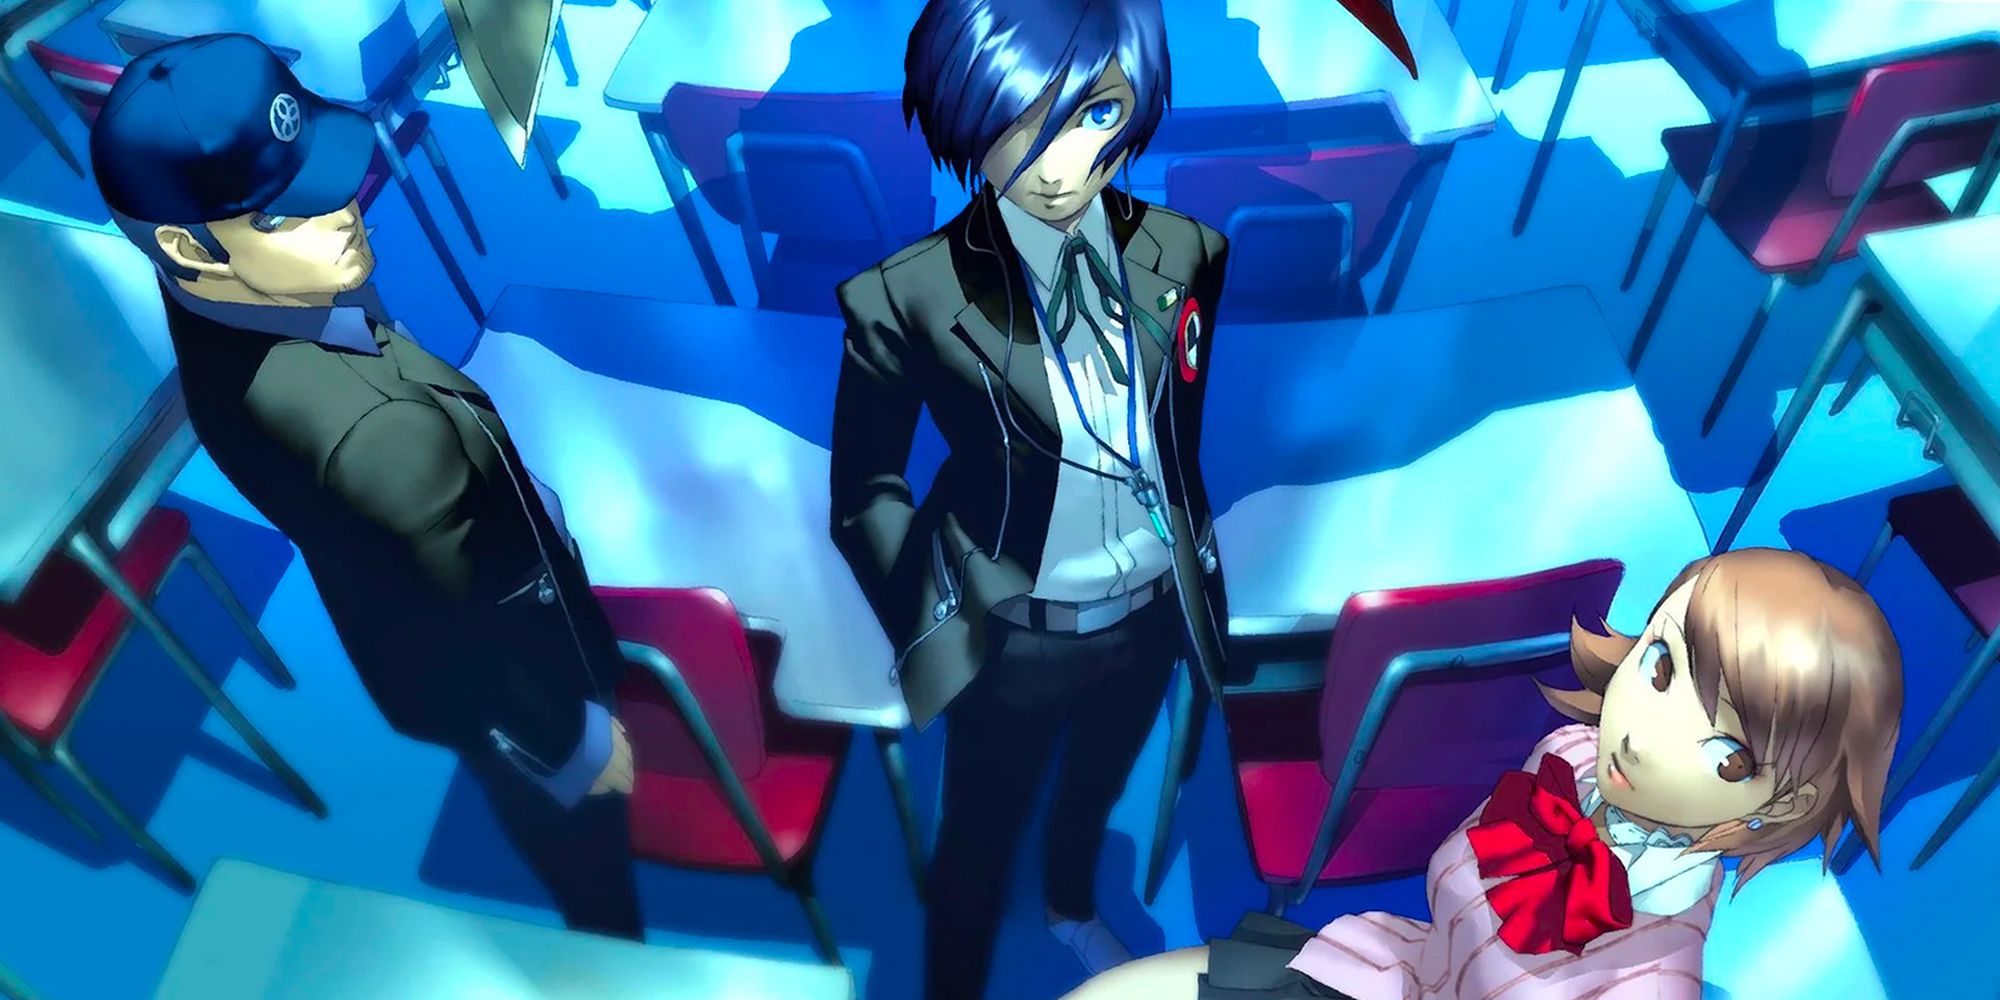 Persona 5 Tactica showcases characters in new trailer - GamEir